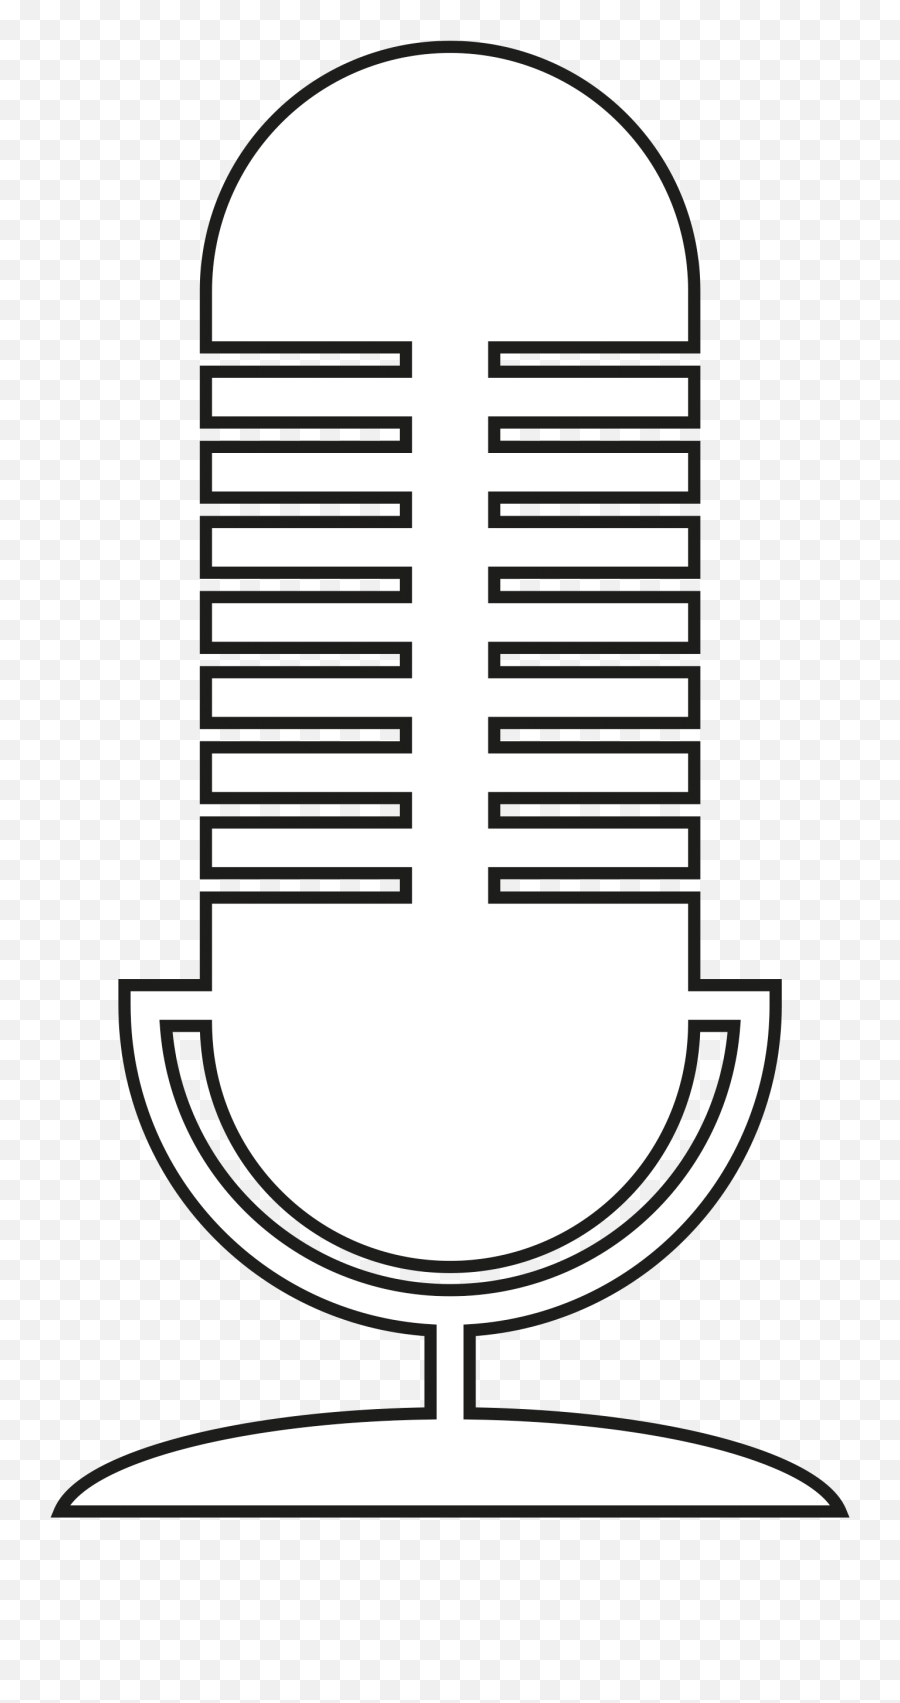 Listen Here - You Shouldnu0027t Start A P2p Project Without A Language Png,Old Microphone Icon